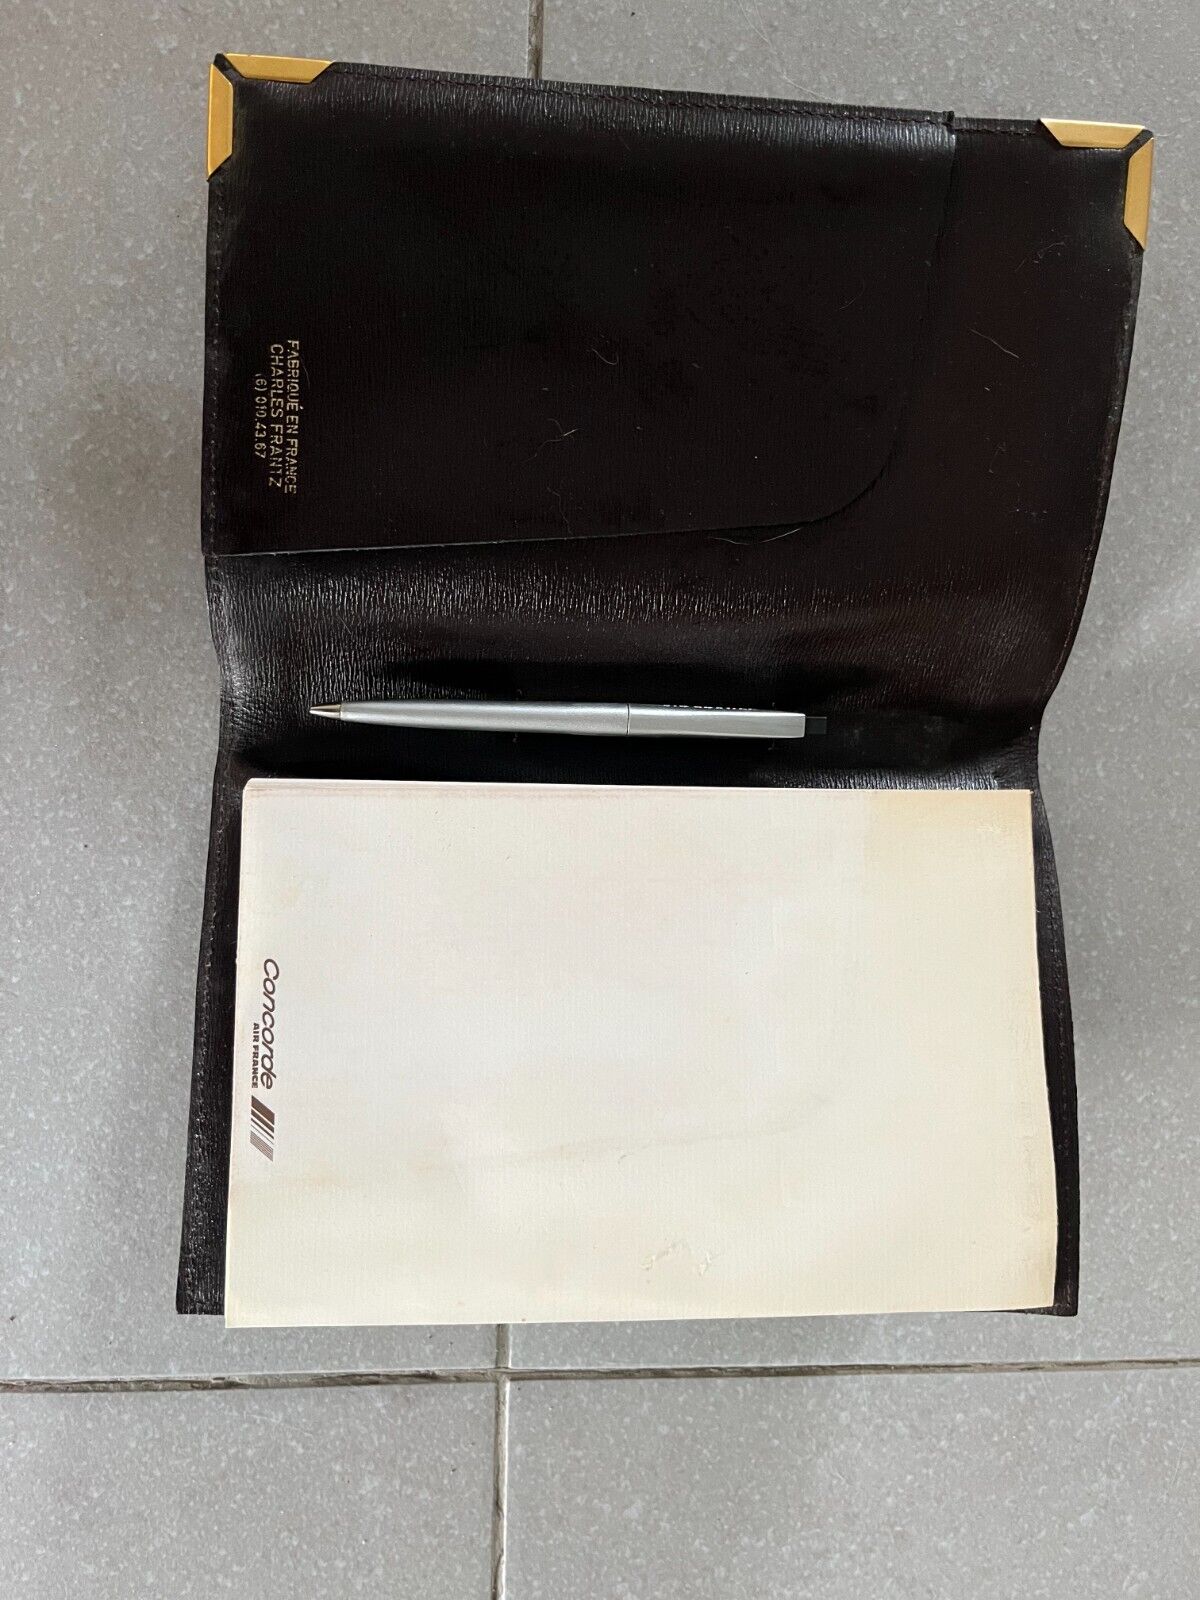 Rare Concorde Air France complete note holder